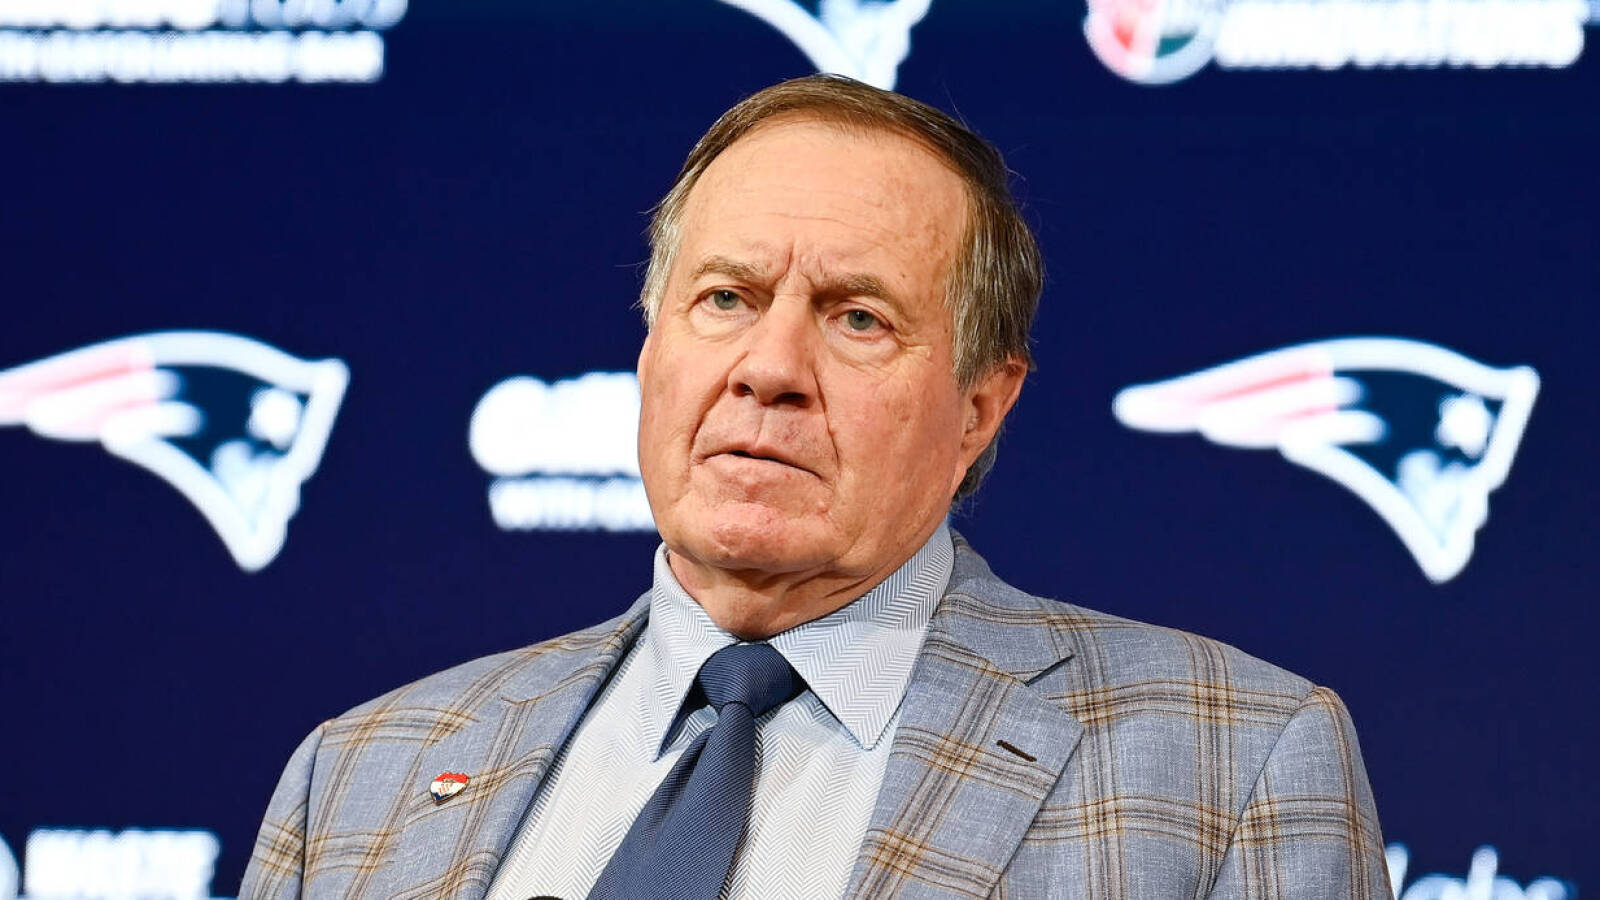 Peyton Manning reveals Bill Belichick's role on 'ManningCast' for this season